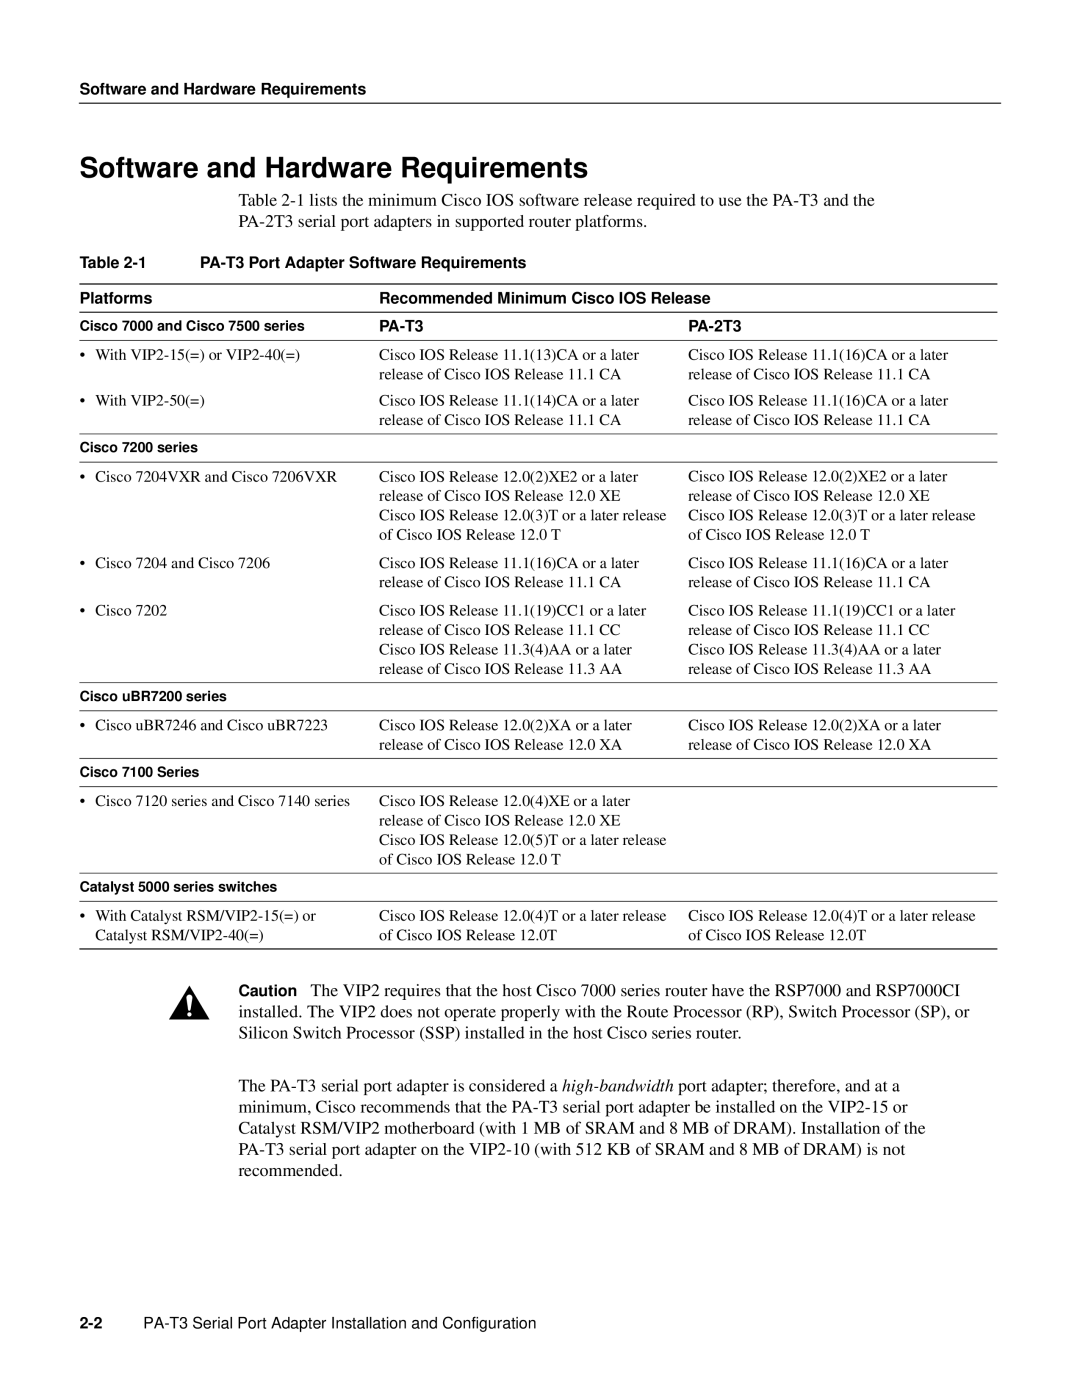 Cisco Systems PA-T3 manual Software and Hardware Requirements 